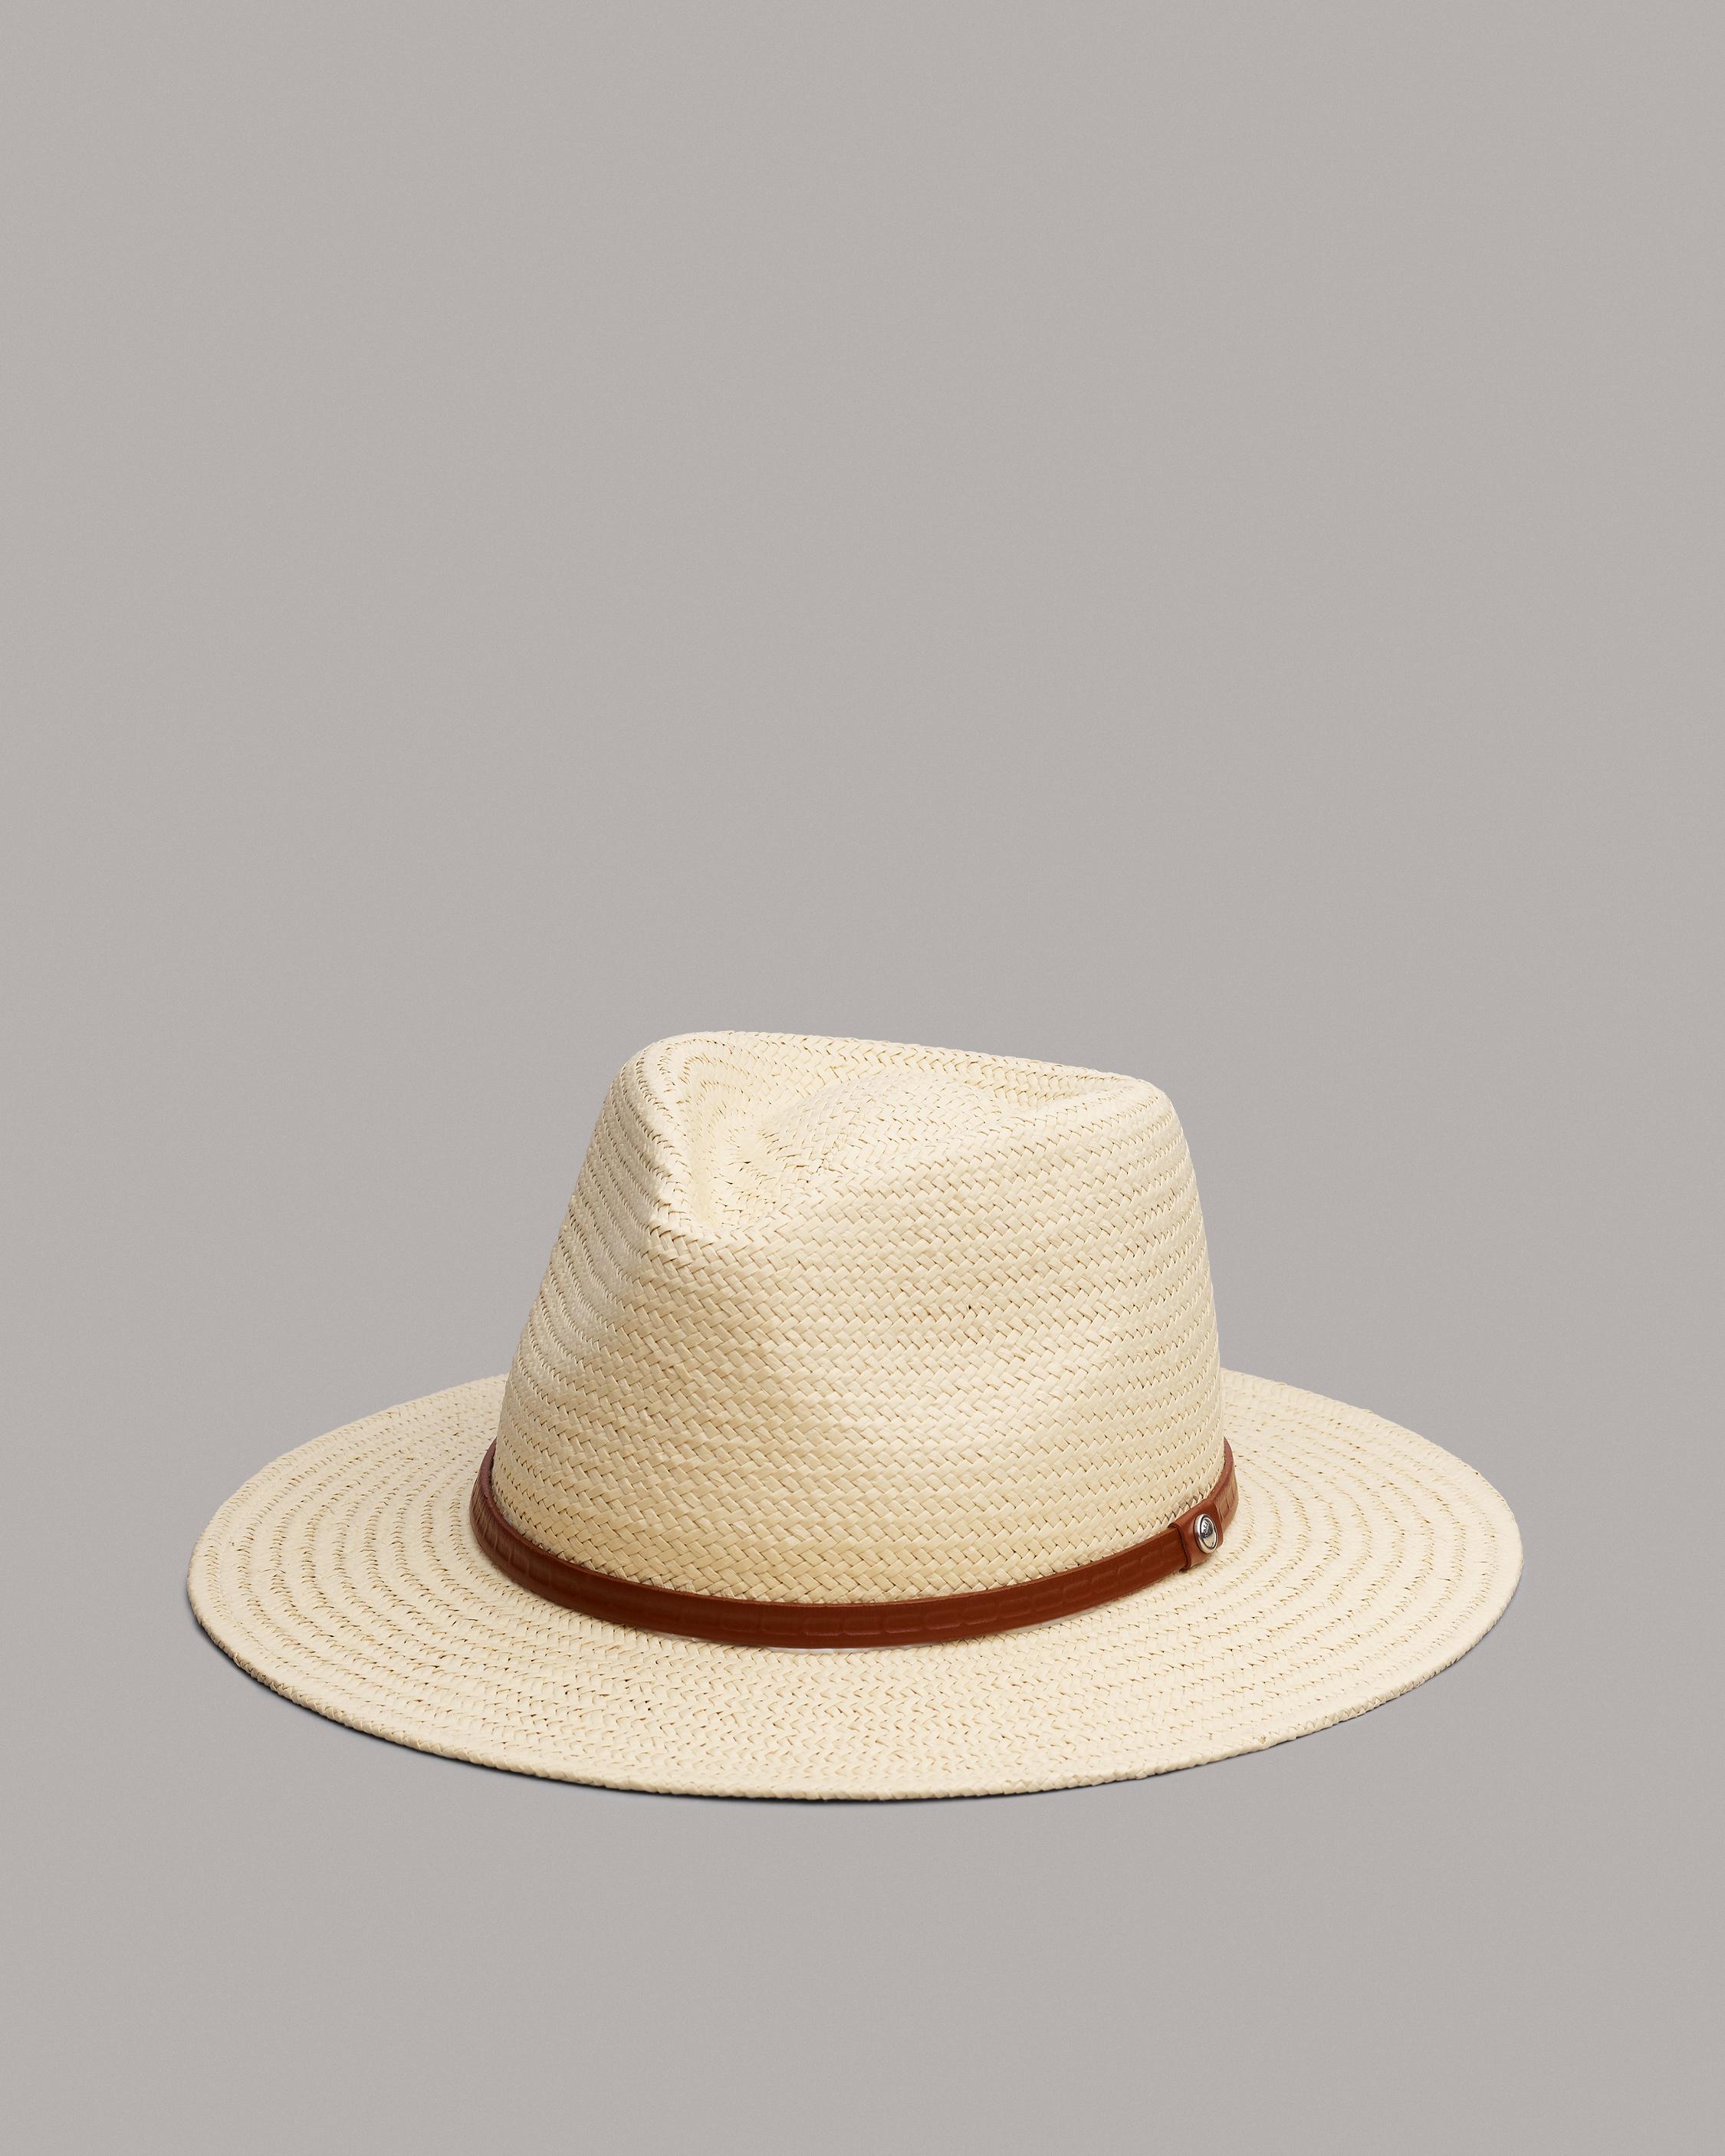 https://cdn.media.amplience.net/i/rb/WJW22H1007PL07-101-A/Packable-Fedora-101?$large$&fmt=auto